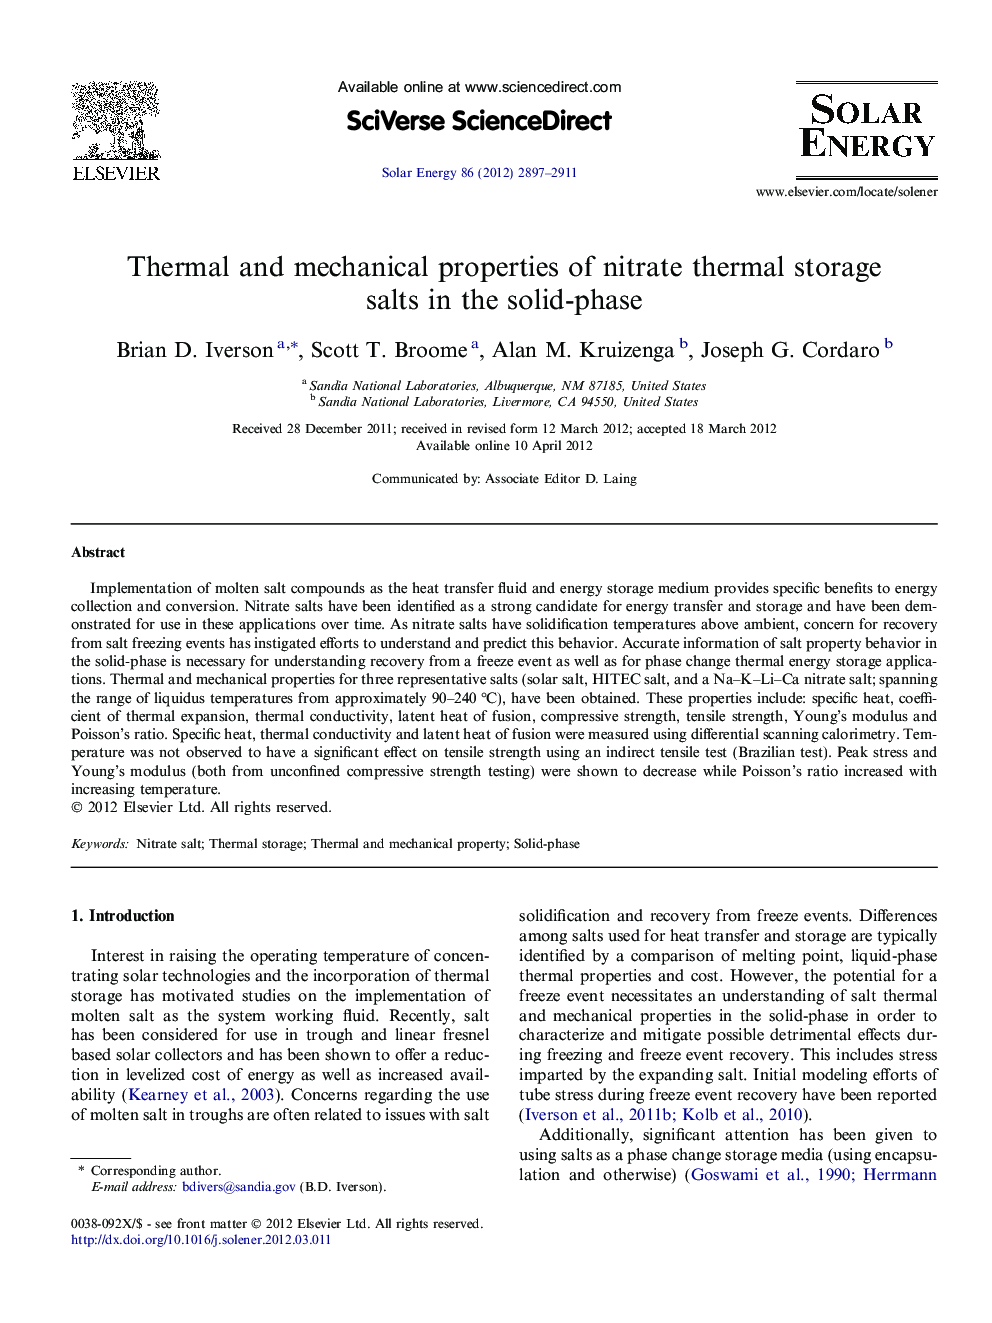 Thermal and mechanical properties of nitrate thermal storage salts in the solid-phase